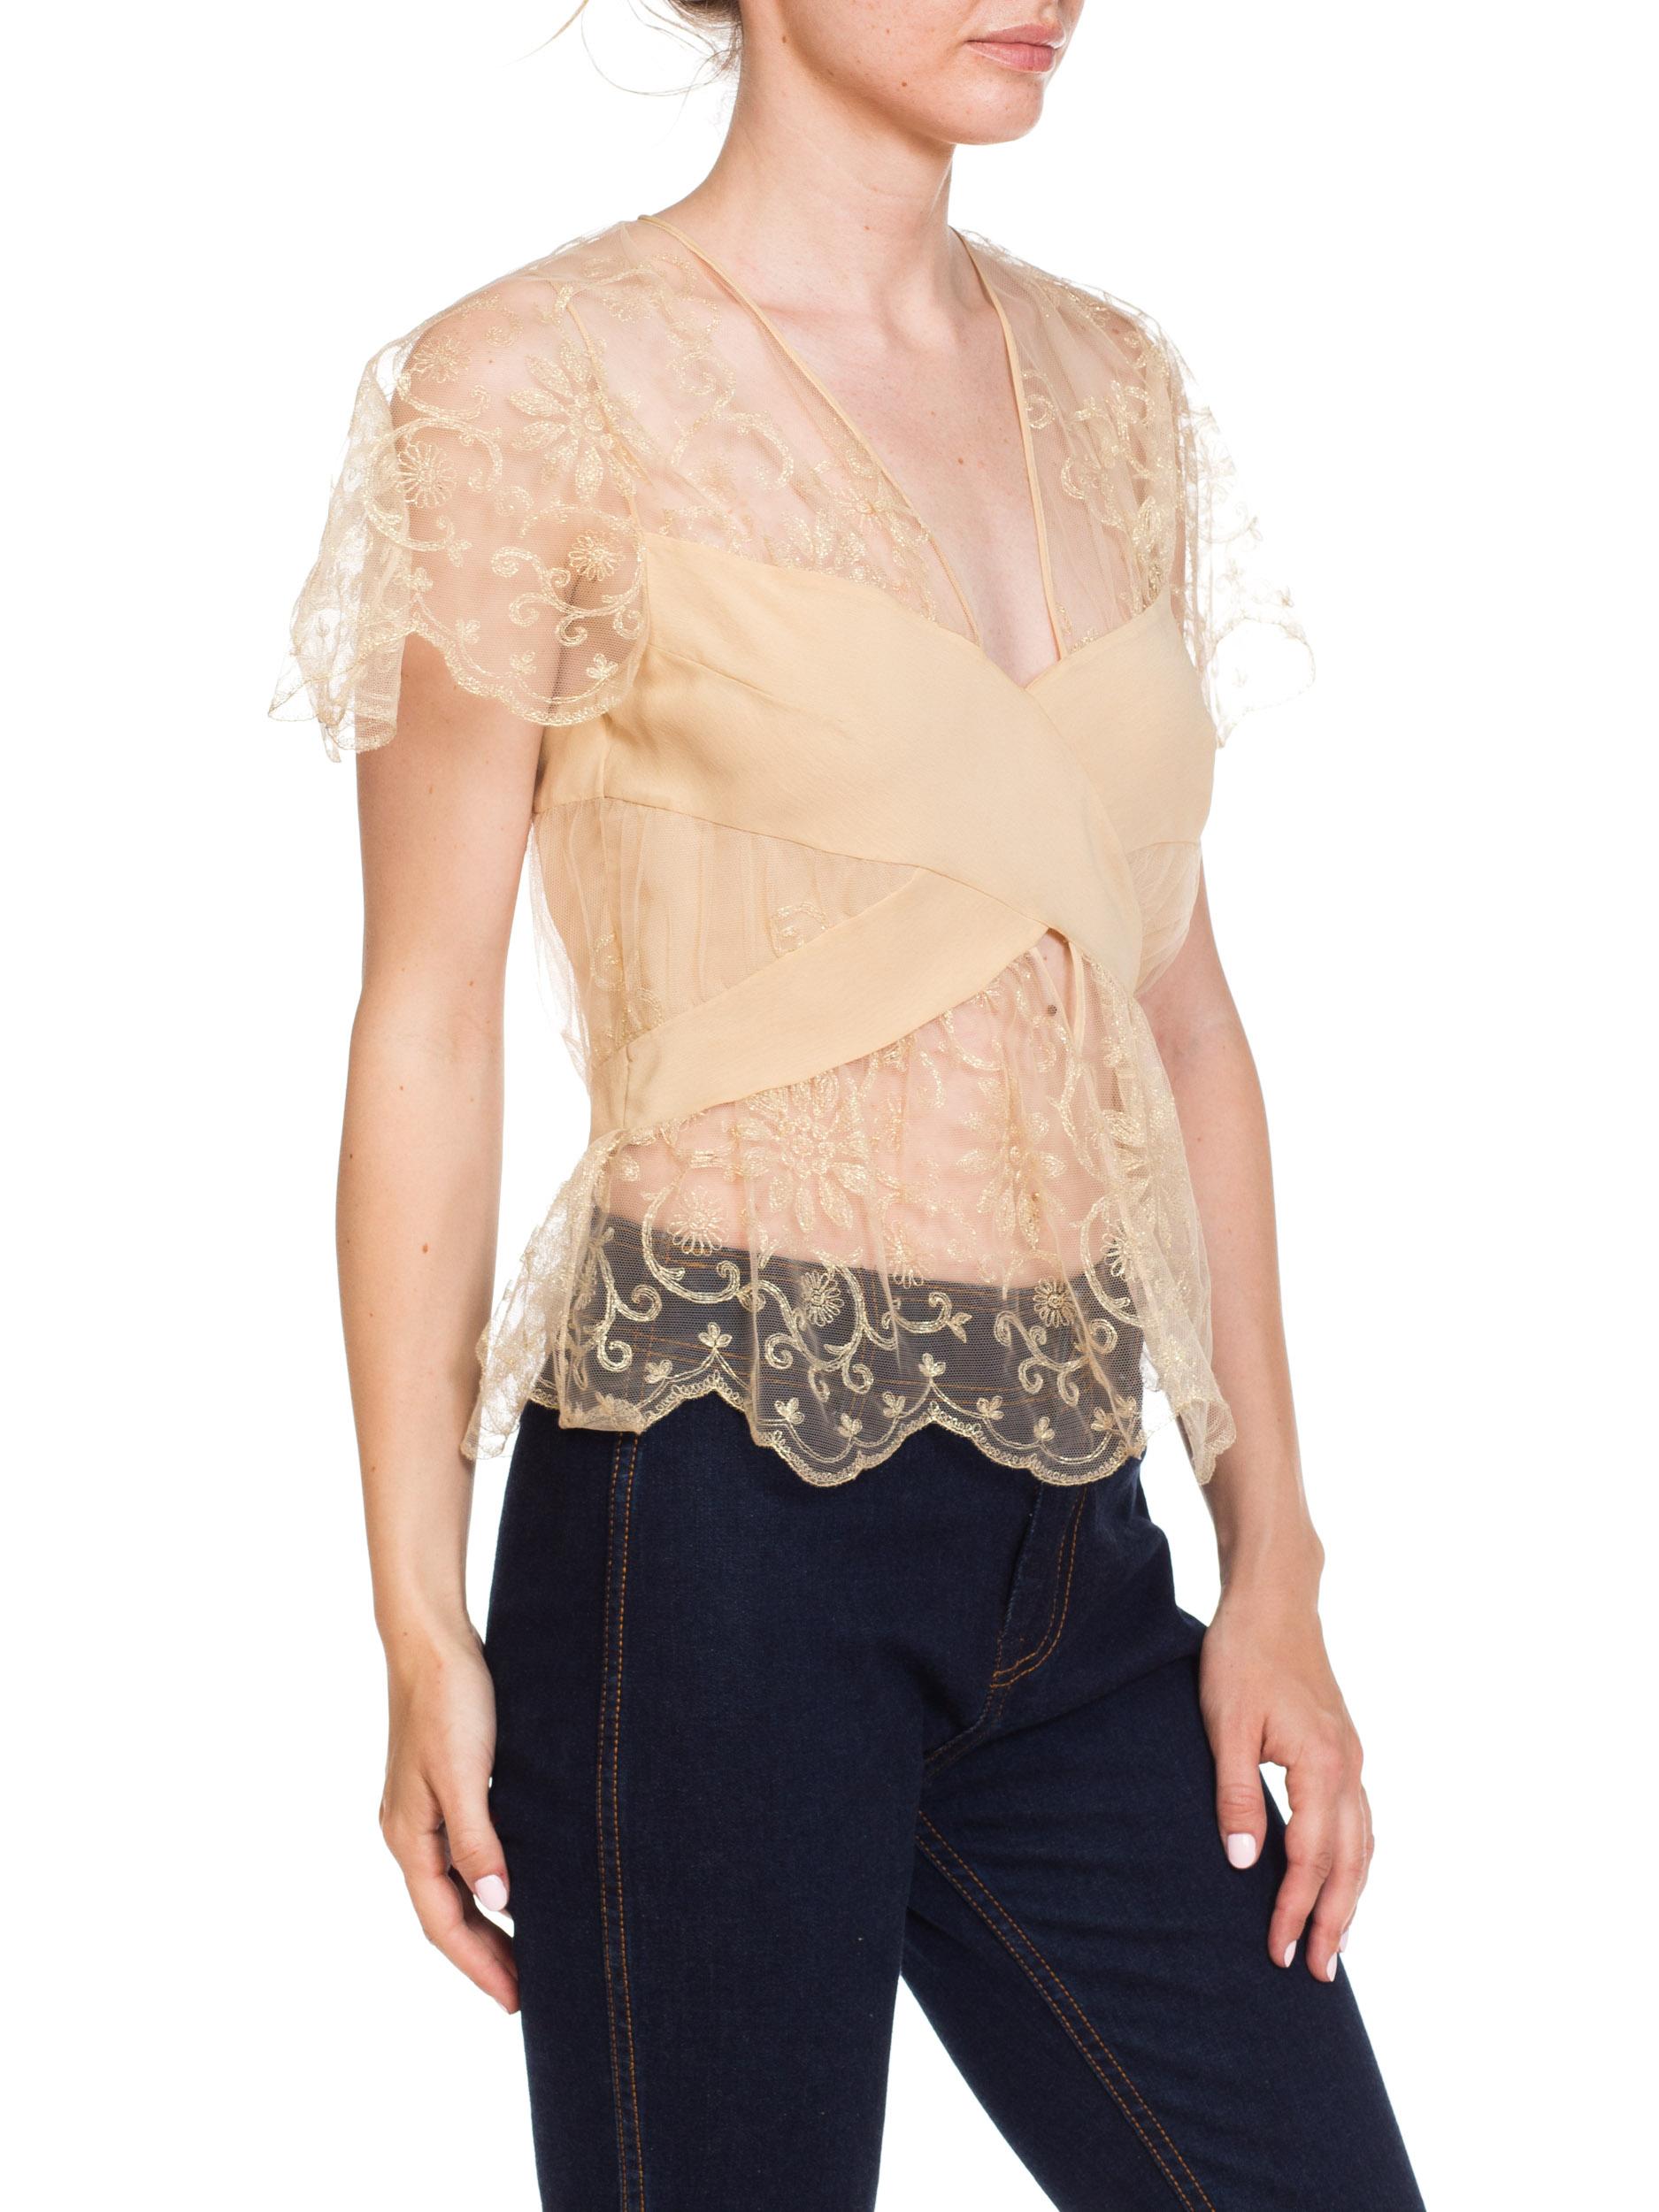 Beige John Galliano for Christian Dior Sheer Lace Blouse